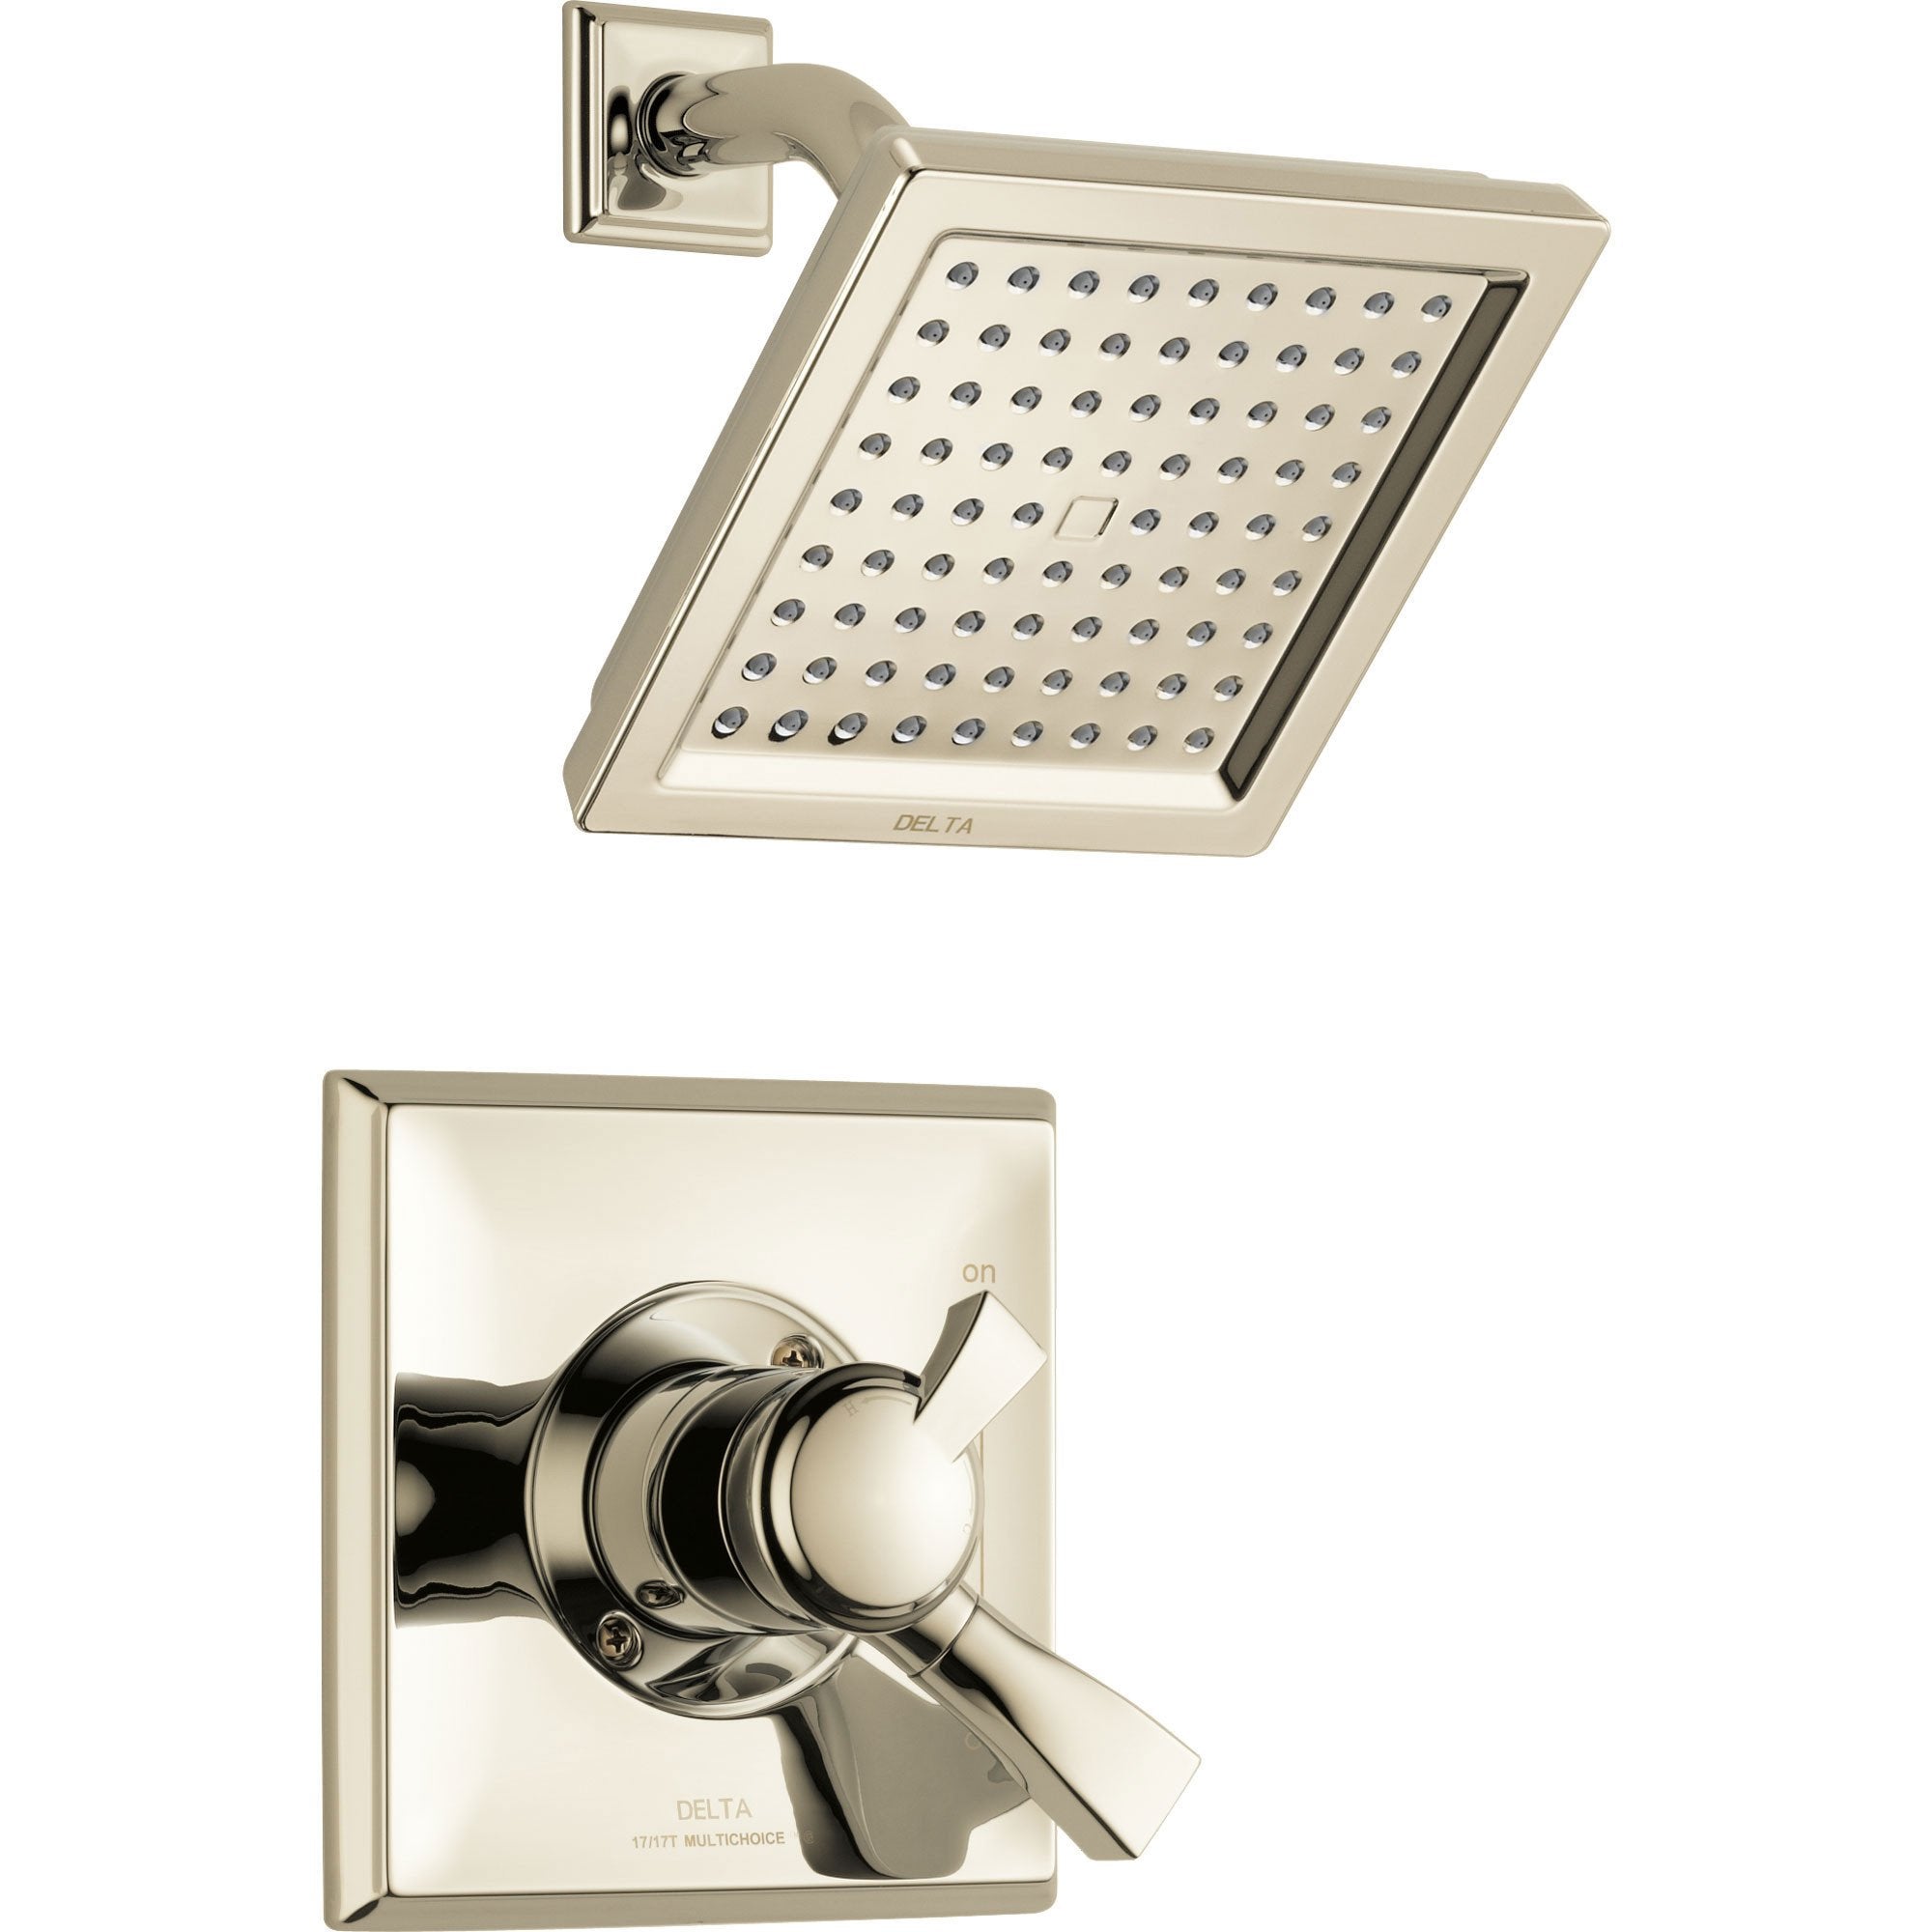 Delta Dryden Modern Square Polished Nickel Finish Shower Only Faucet with Dual Temperature and Pressure Control INCLUDES Rough-in Valve D1146V